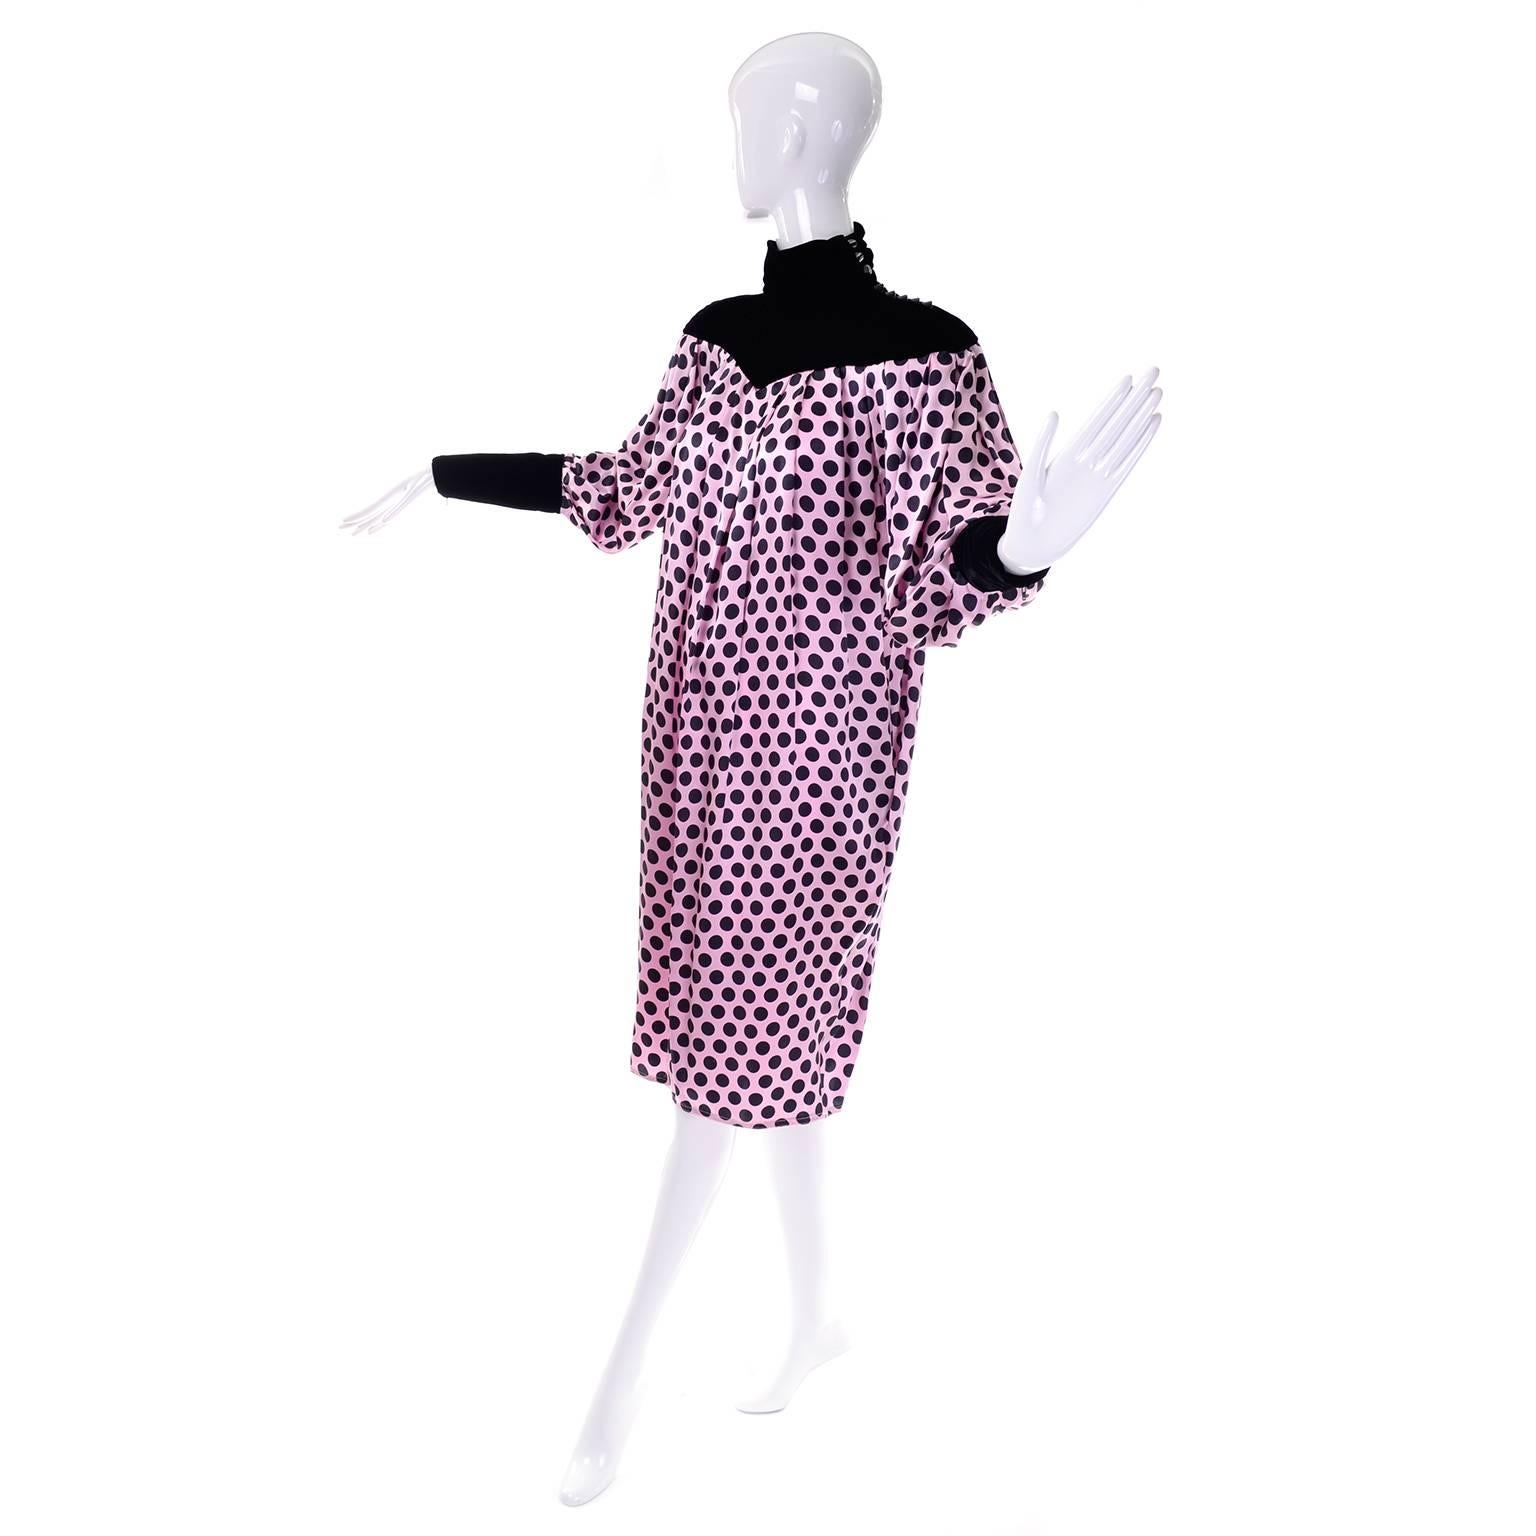 This is a stunning Ungaro vintage 1980's pink silk dress with black polka dots, black velvet turtleneck and mutton sleeves. The dress is so easy to wear and nicely pleated down the entire center front and back. It has a gathered black velvet